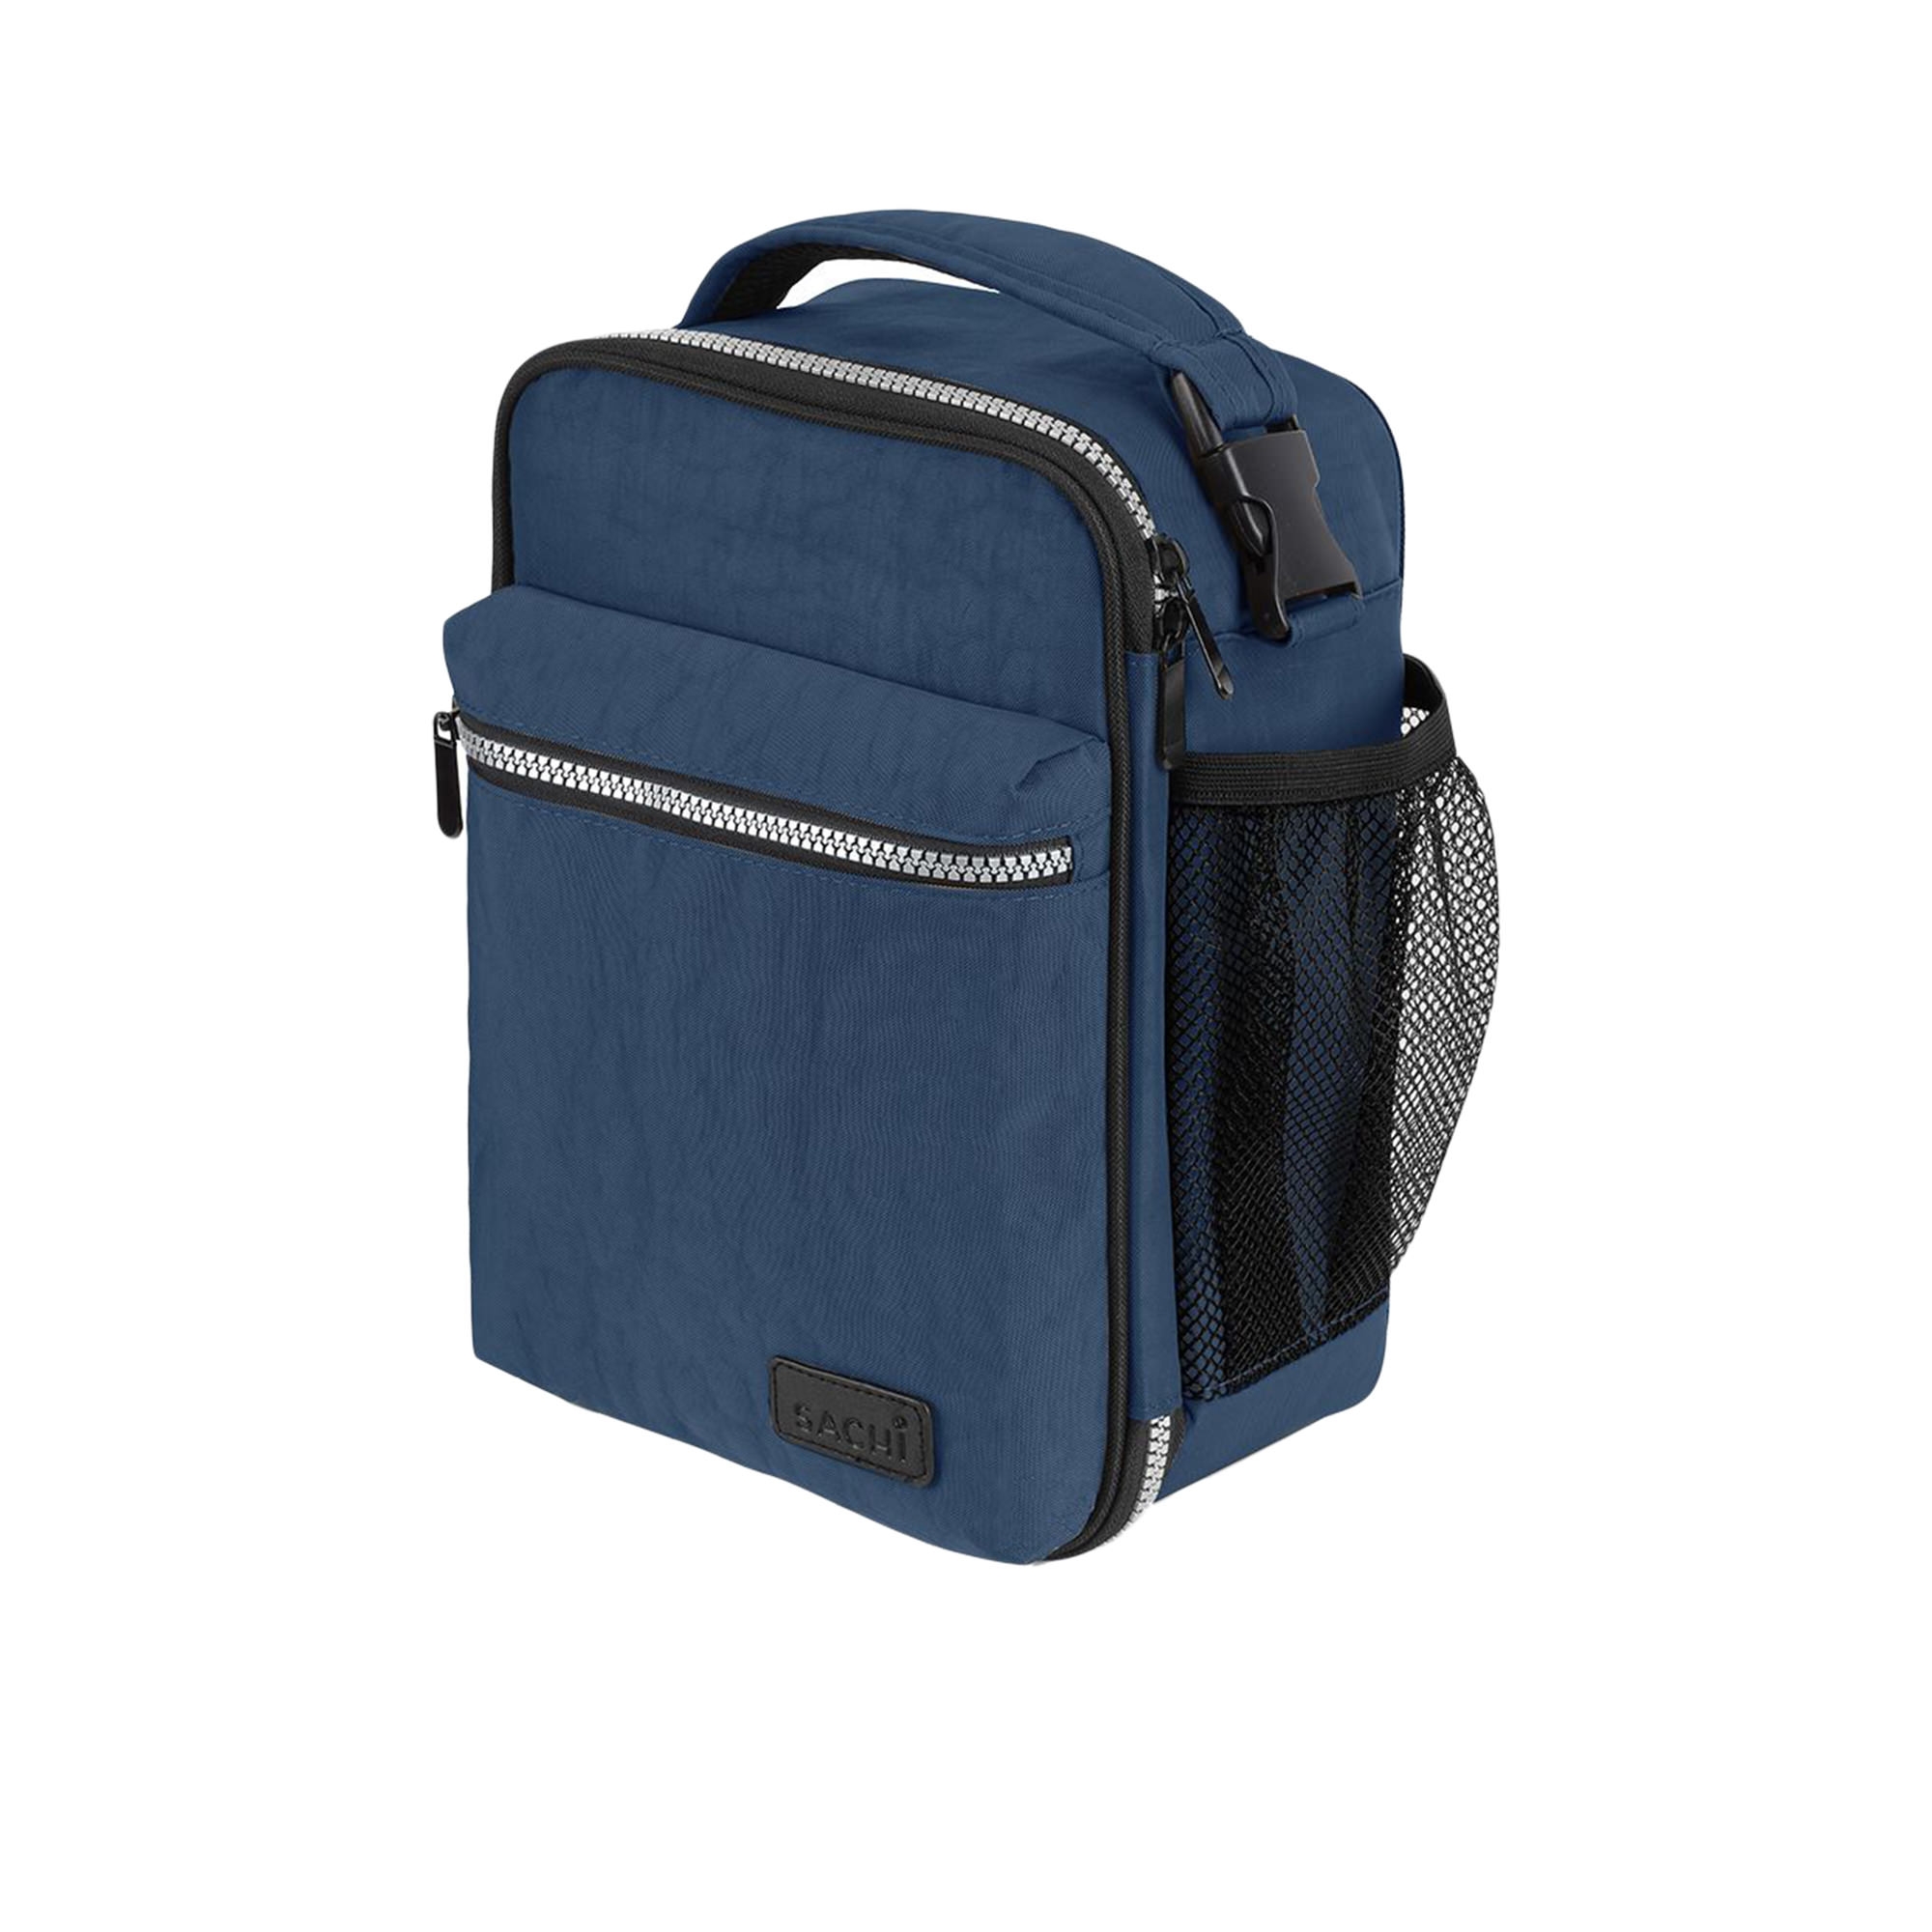 Sachi Explorer Insulated Lunch Bag Navy Image 1